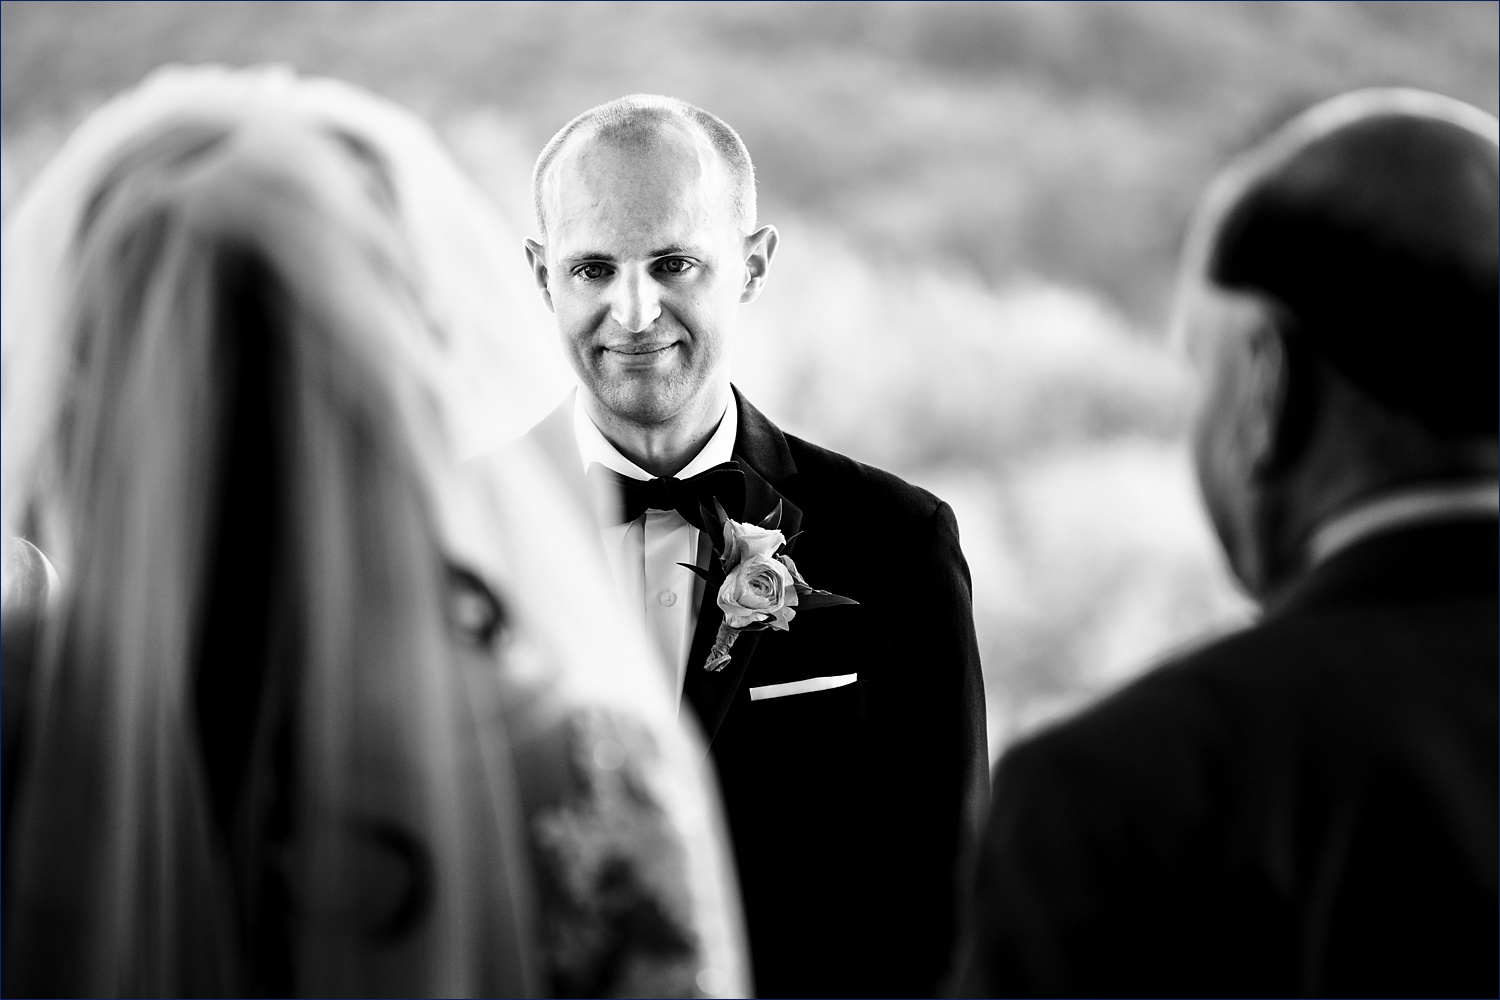 The groom watches the bride come down the aisle with loving eyes